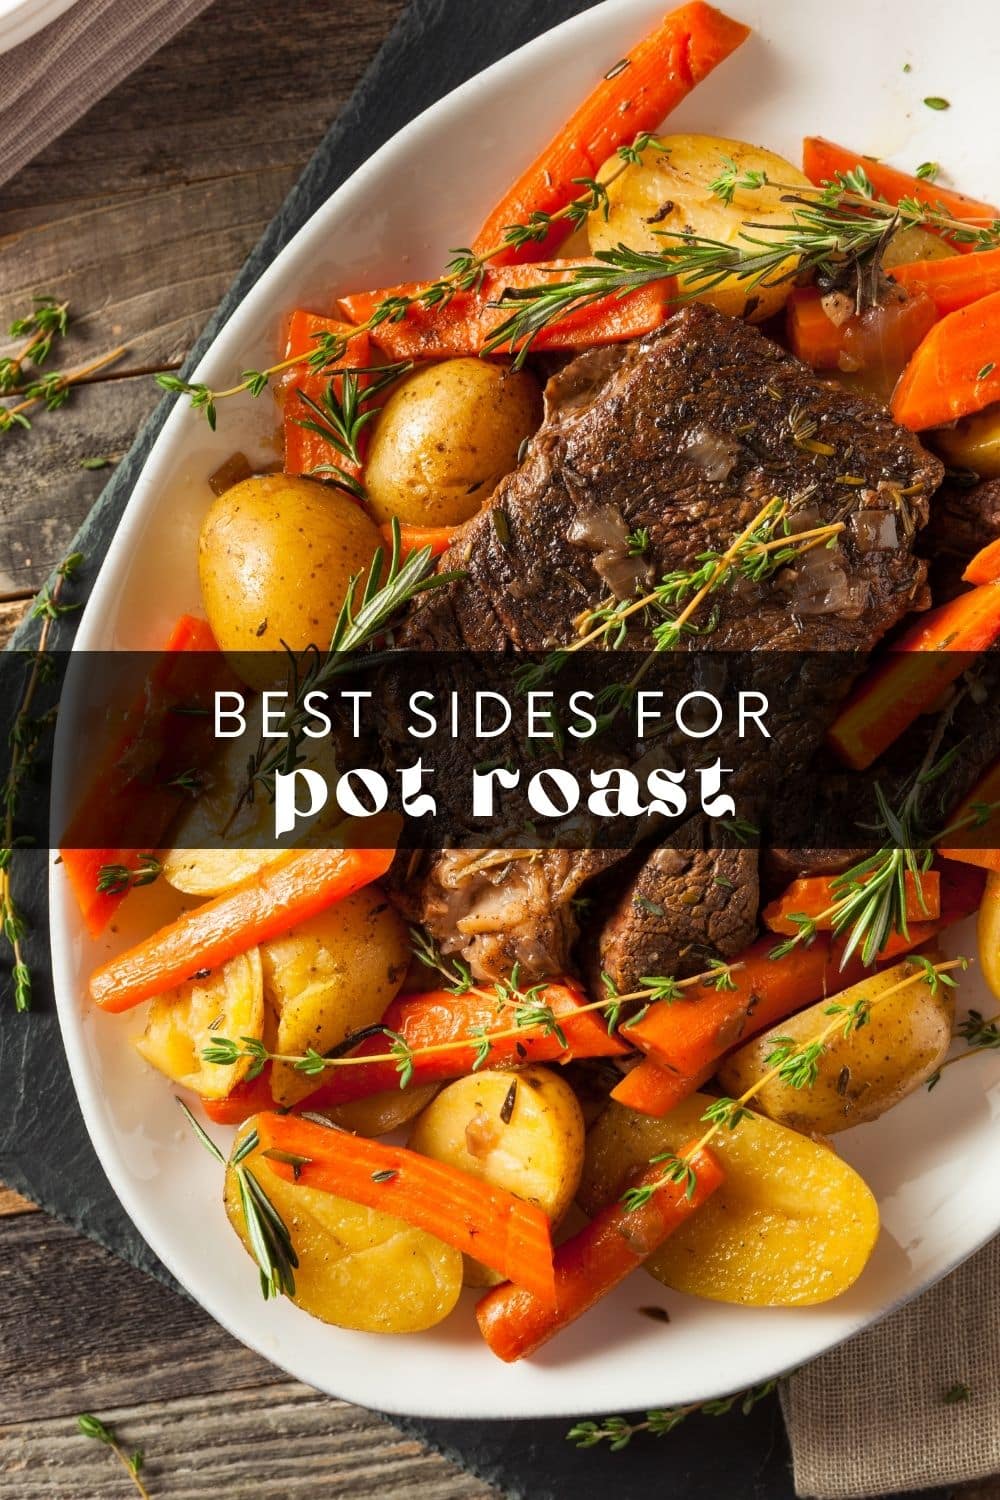 Are you wondering what to serve with pot roast? You want a side dish that will complement the texture and flavor of the pot roast but also add something new. These side options will do just that!